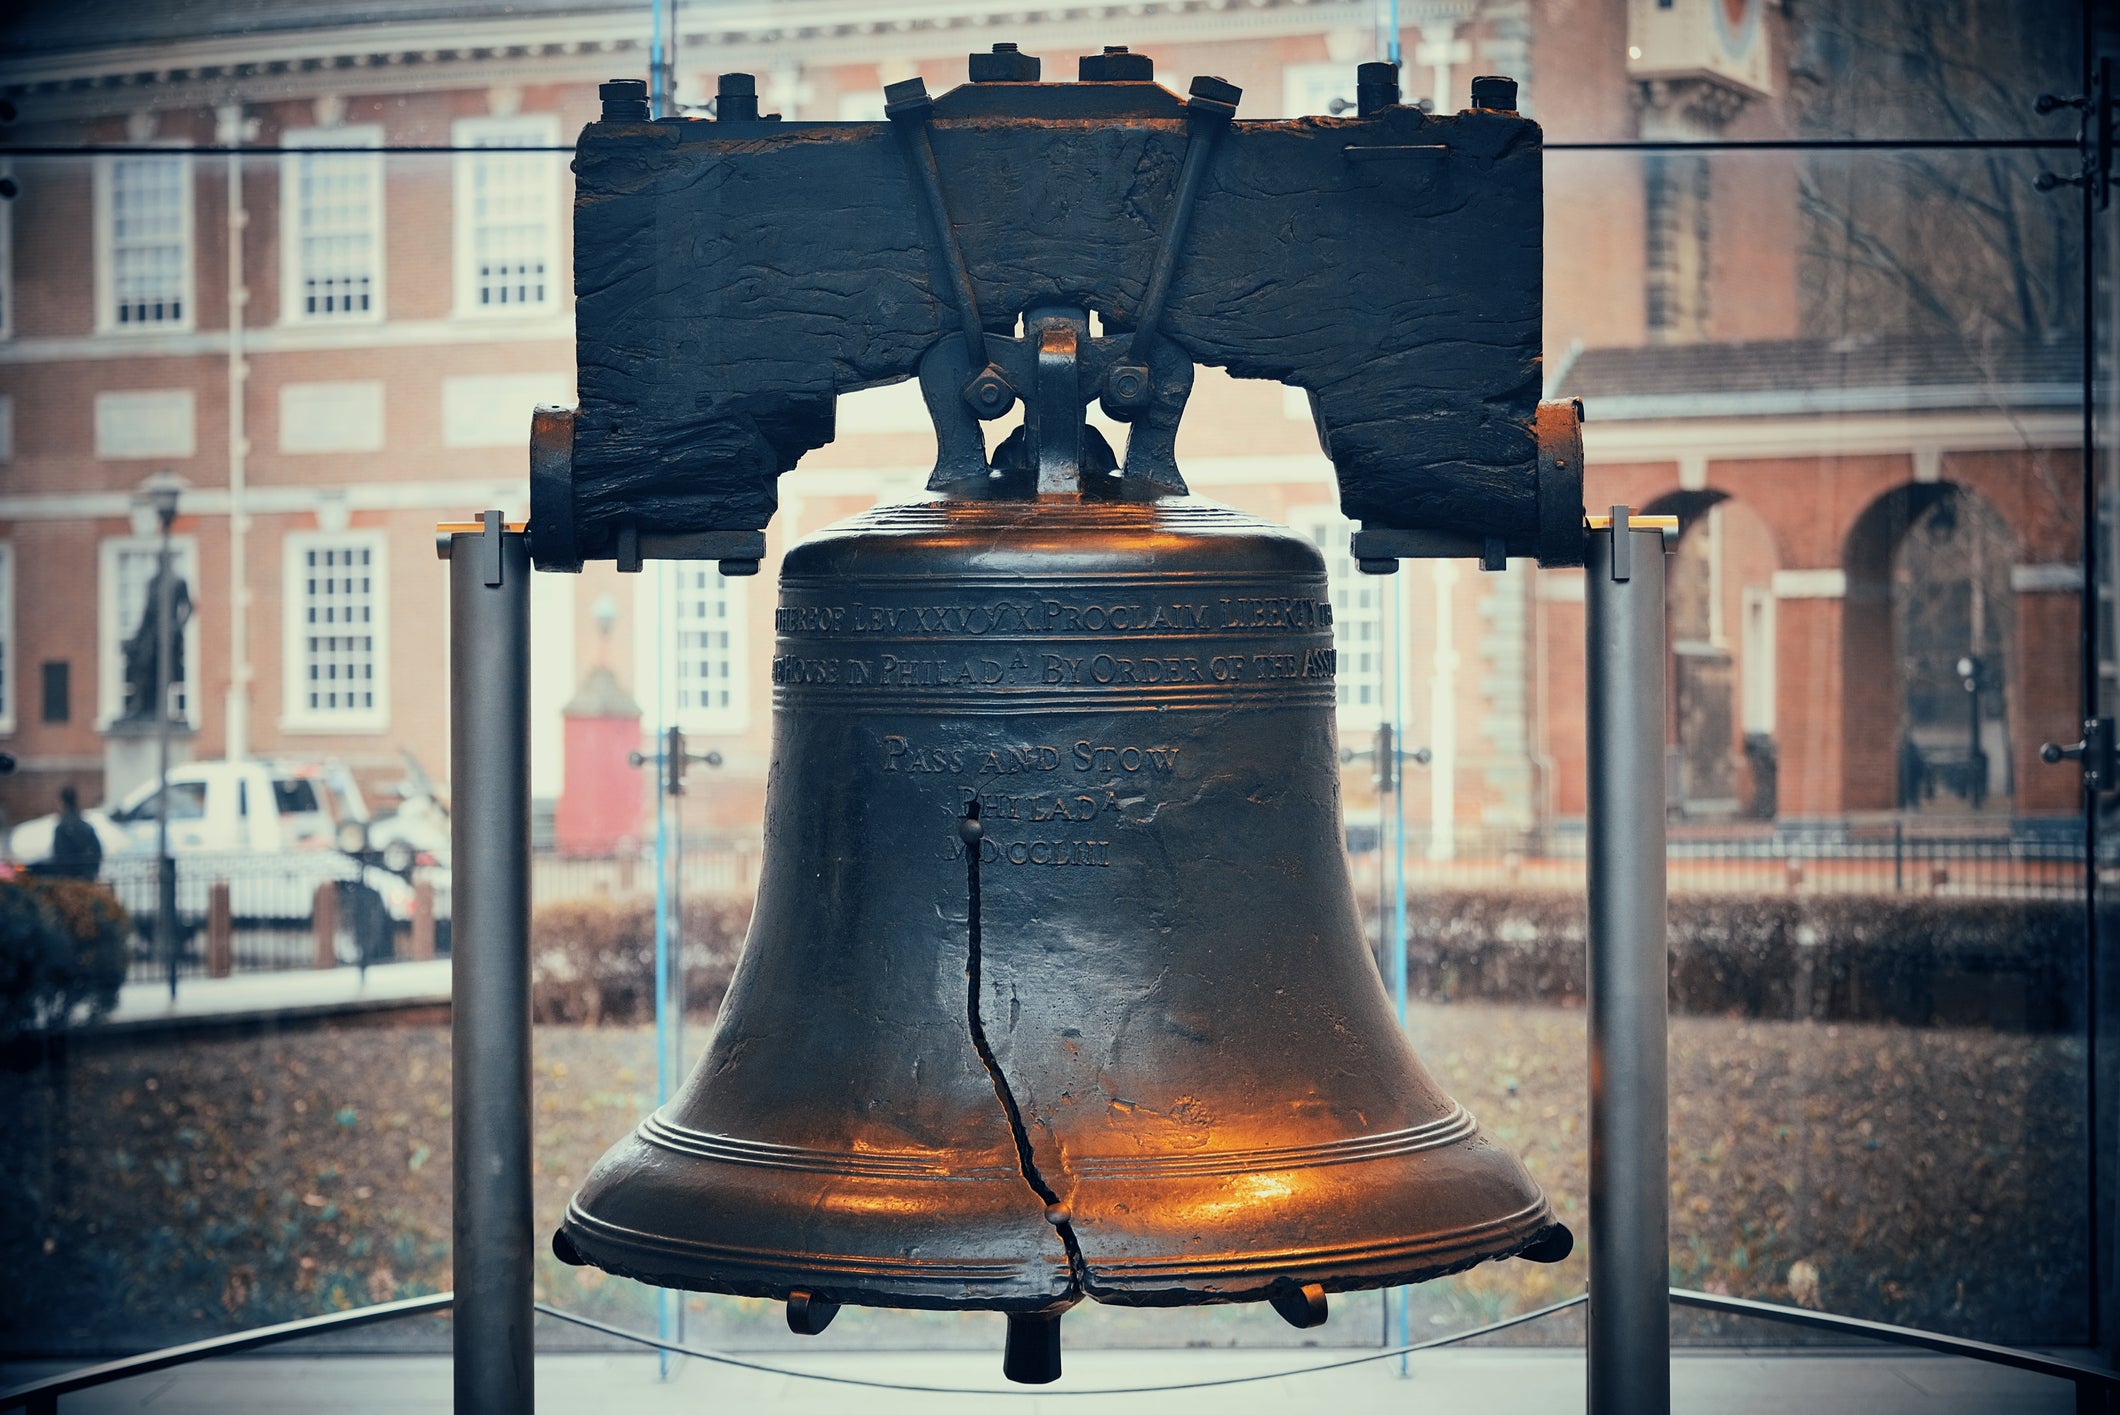 For whom the bell tolls: Philly’s main tourist attraction, the Liberty Bell